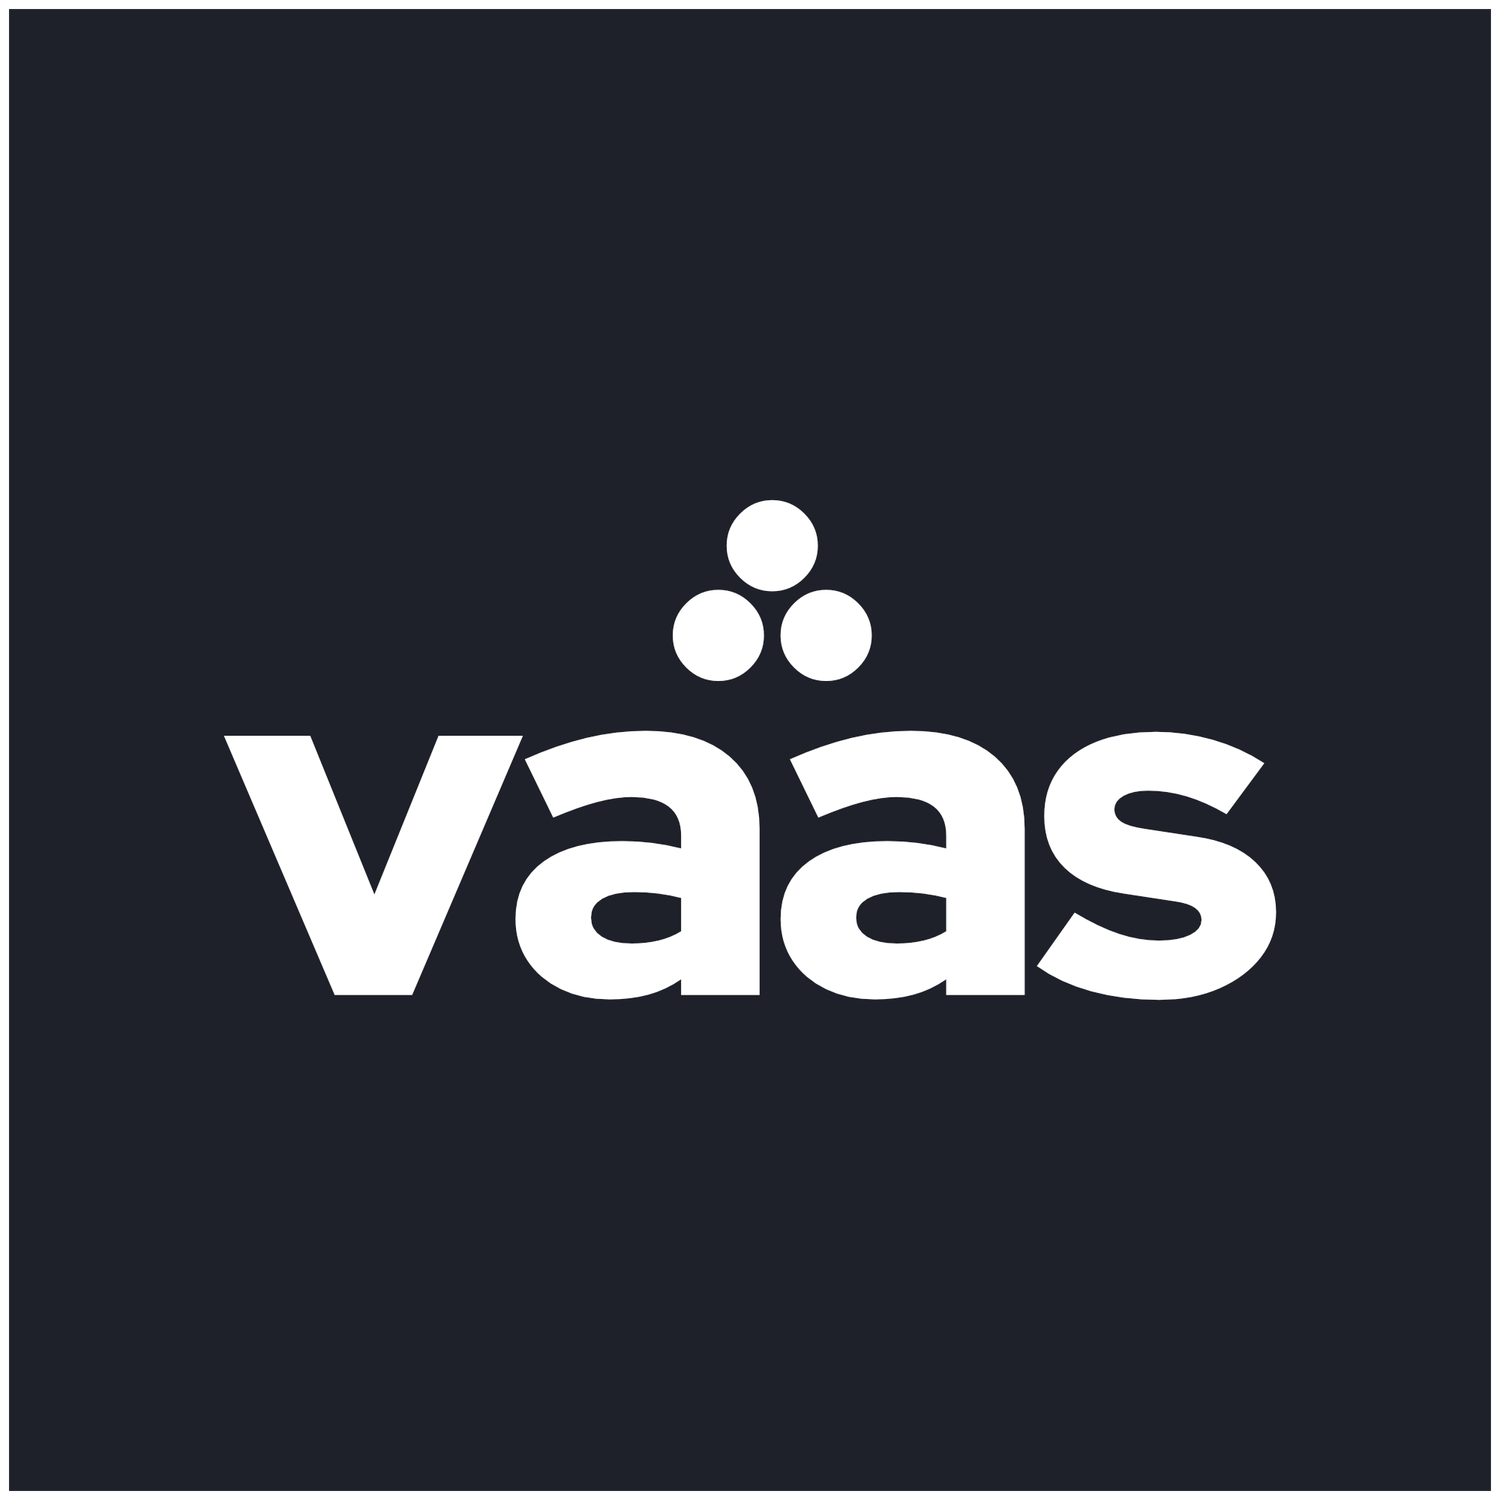 vaas.one - experts in building essence in idenity and messaging that moves hearts and minds.